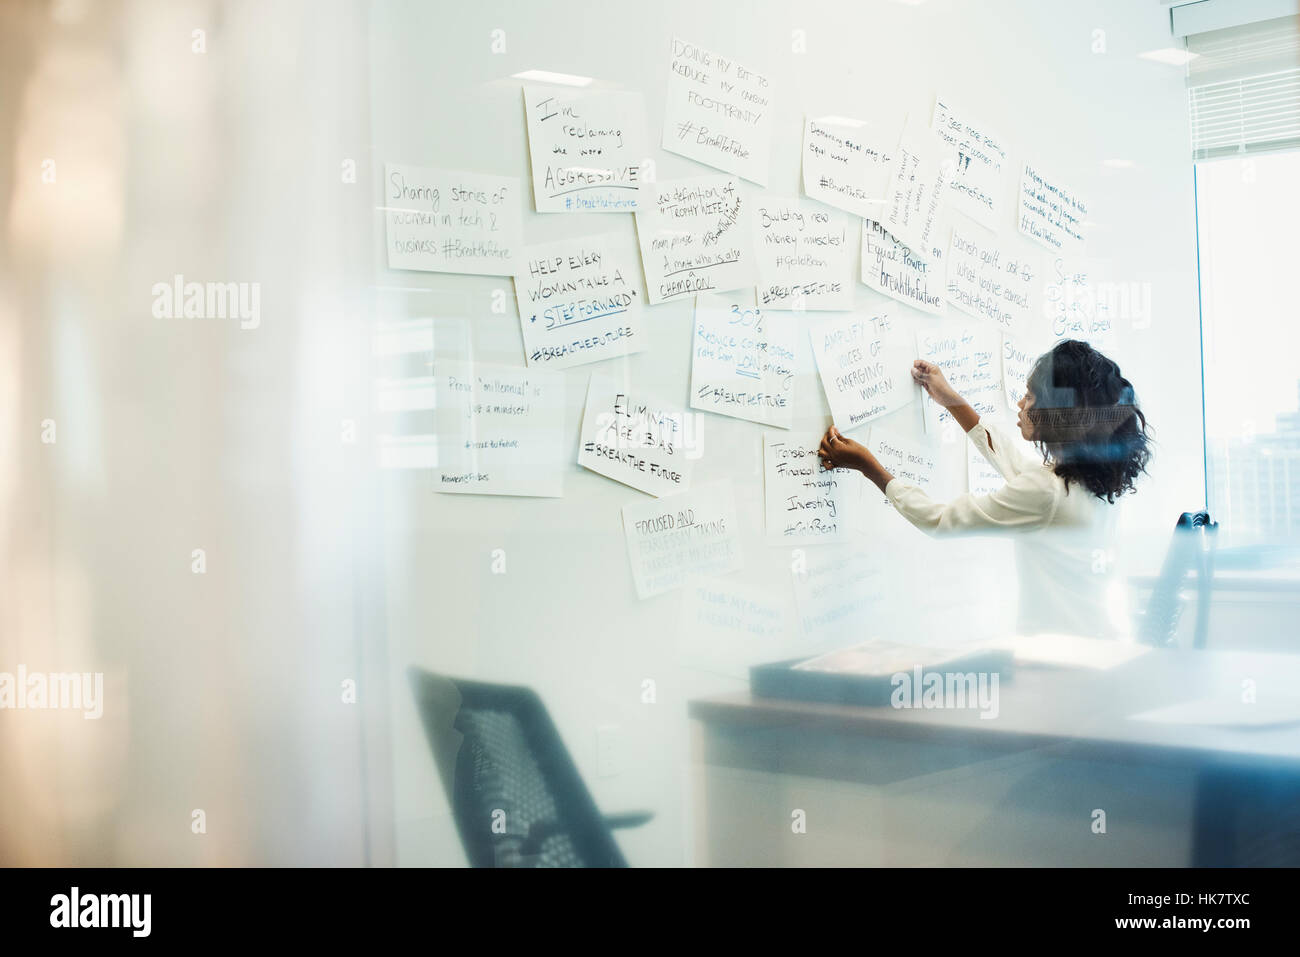 A woman standing in an office arranging pieces of paper pinned on a whiteboard. Stock Photo